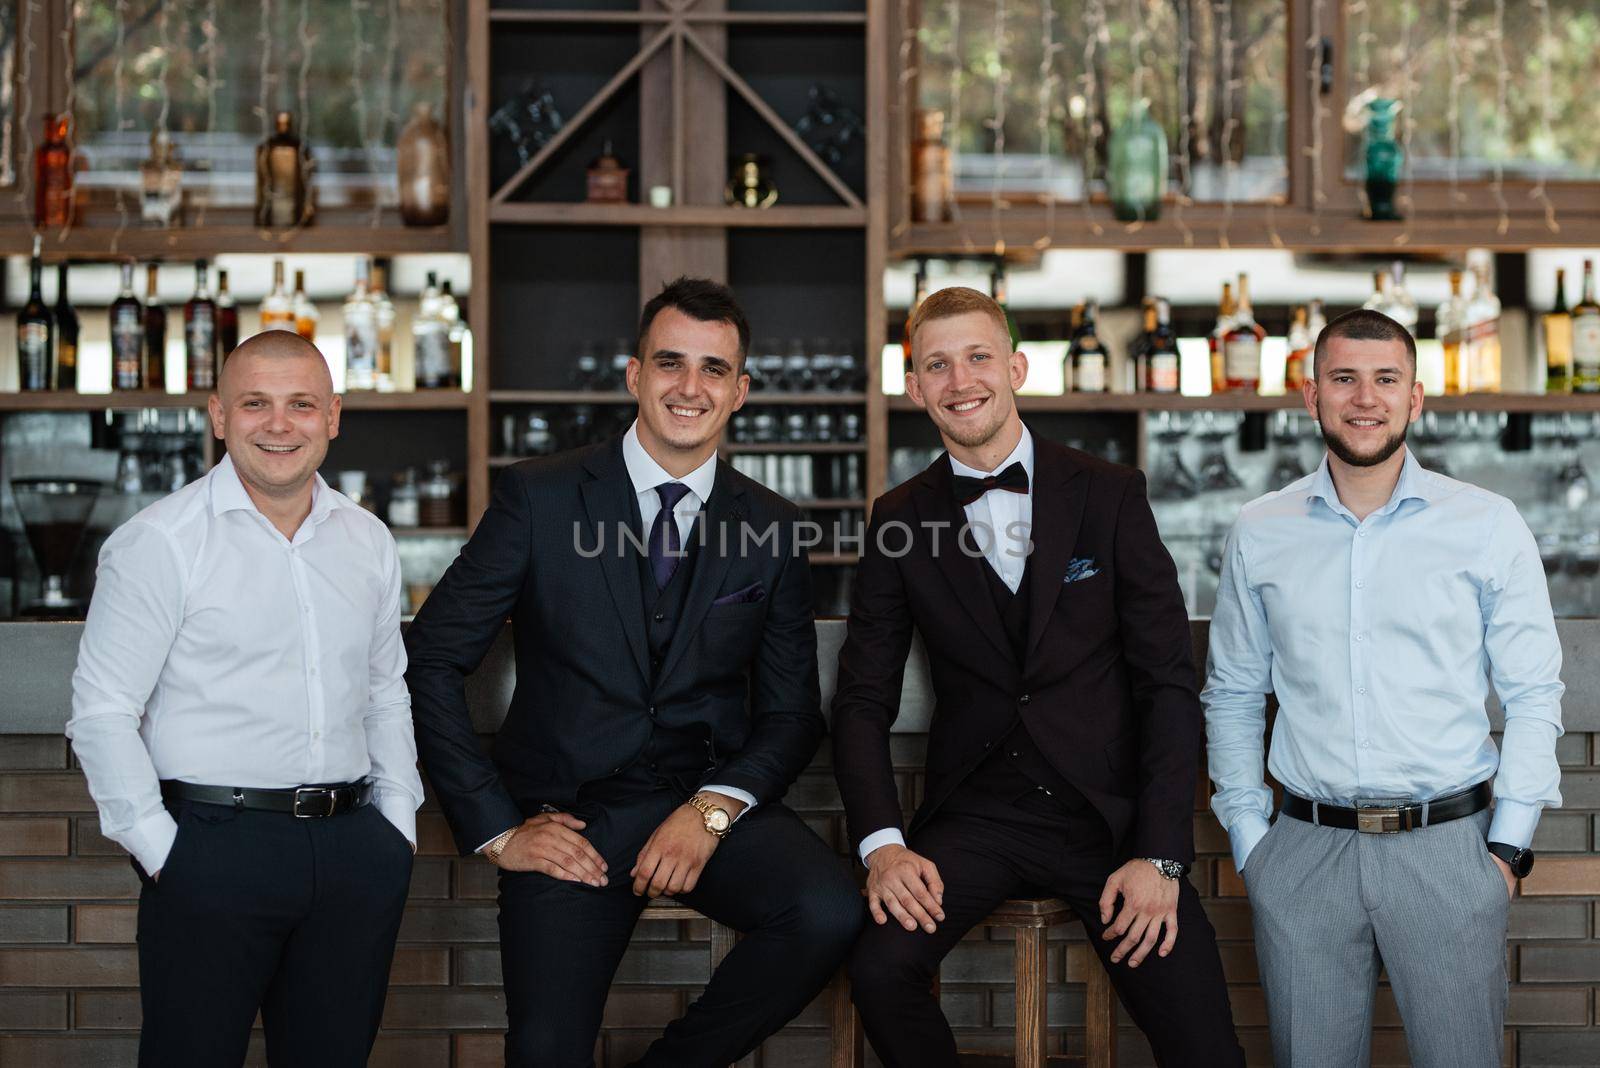 groom in a brown suit and his friends at the bar